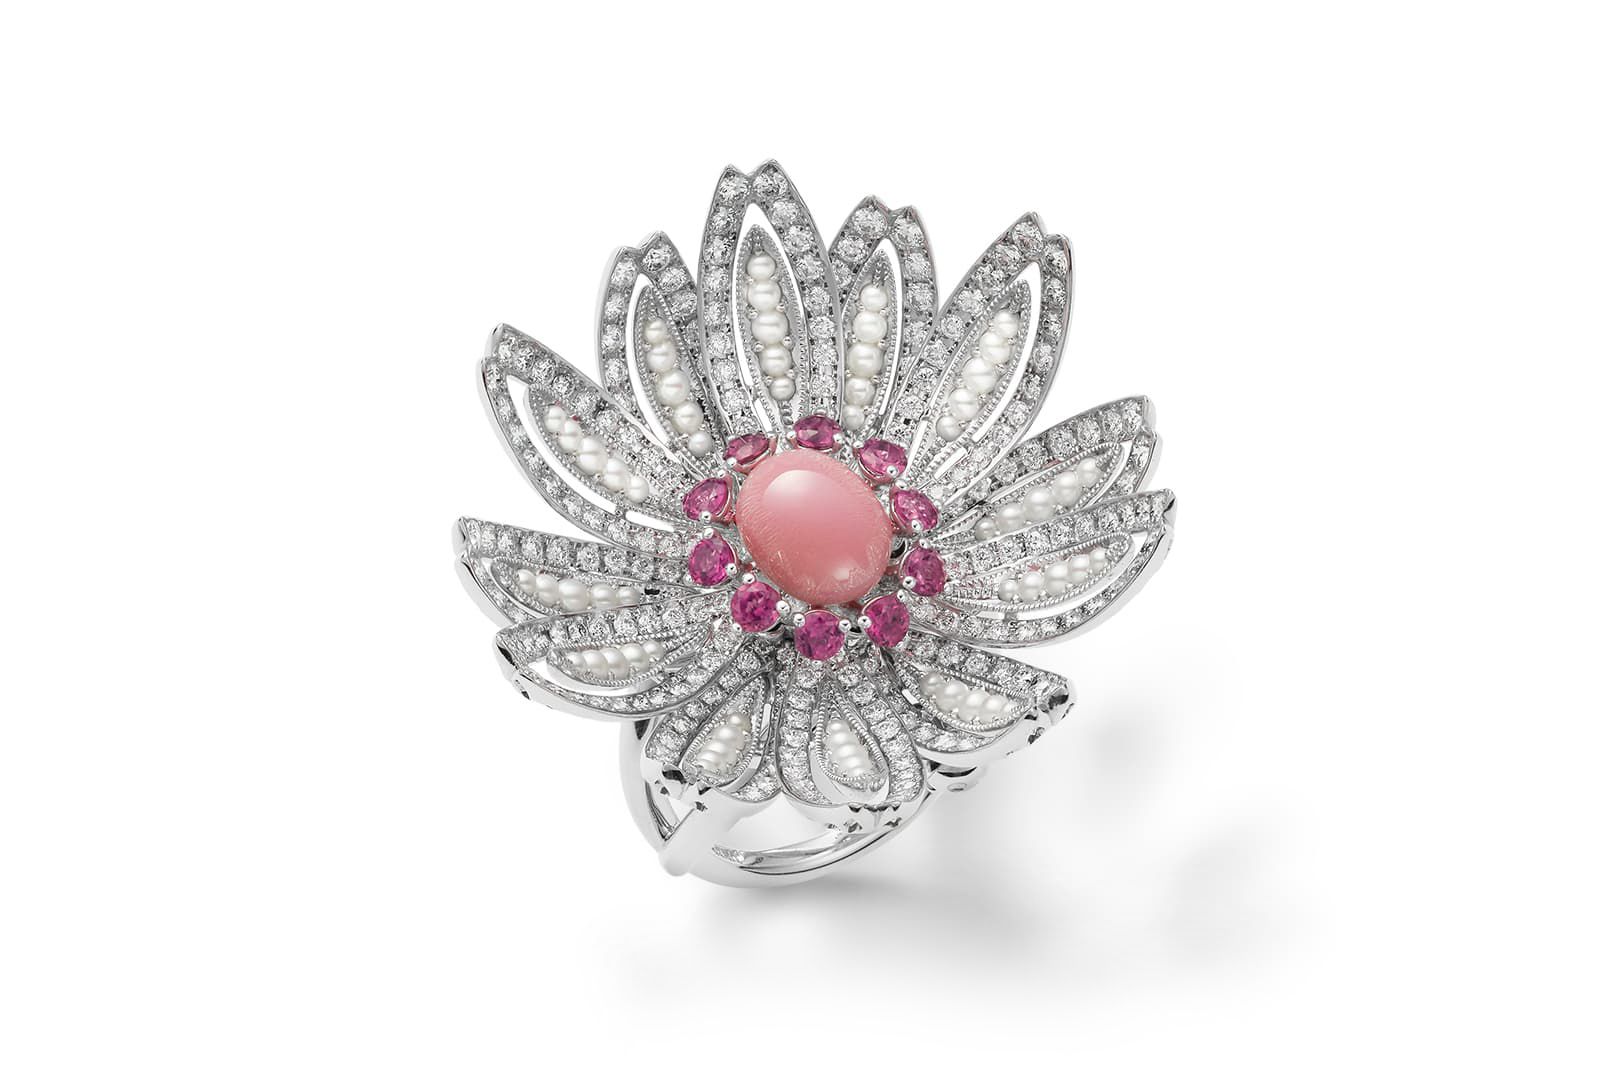 Mikimoto 'The Japanese Sense of Beauty' High Jewellery Collection Chrysanthemum brooch in 18k white gold and platinum with a natural conch pearl, Akoya keshi pearls, tourmaline, ruby and diamonds